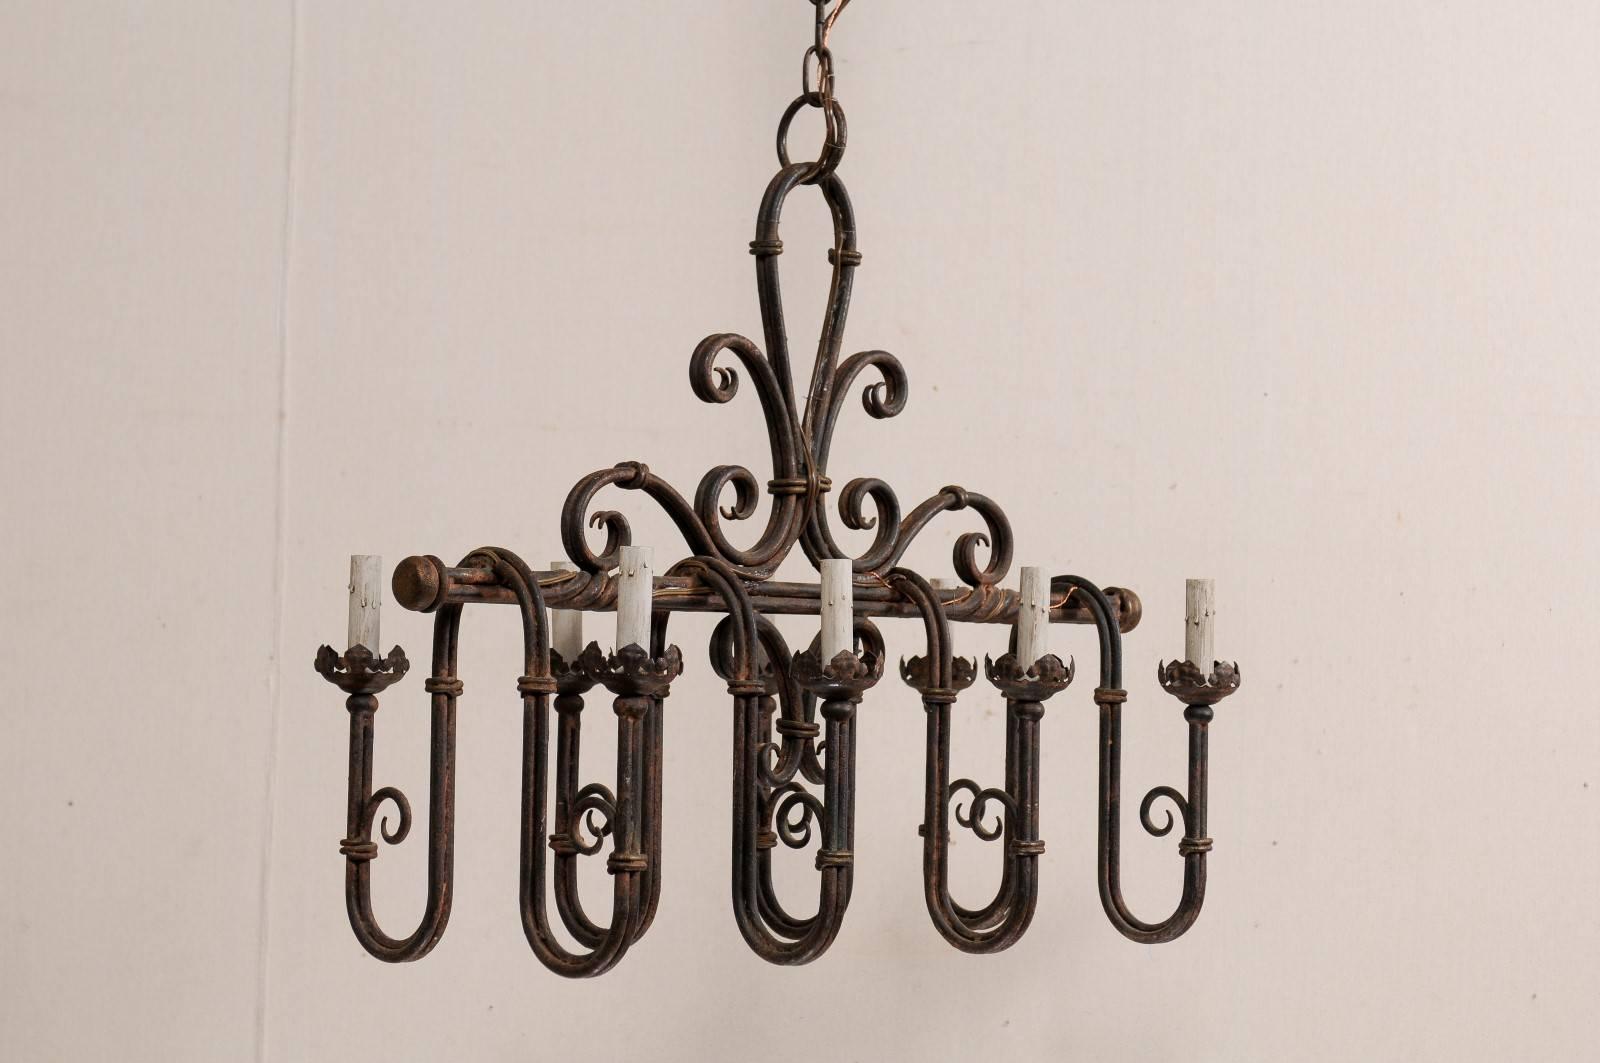 Patinated An Elaborate French Iron 8-Light Chandelier w/Deep Swag Arms & Fleur-De-Lis Top For Sale